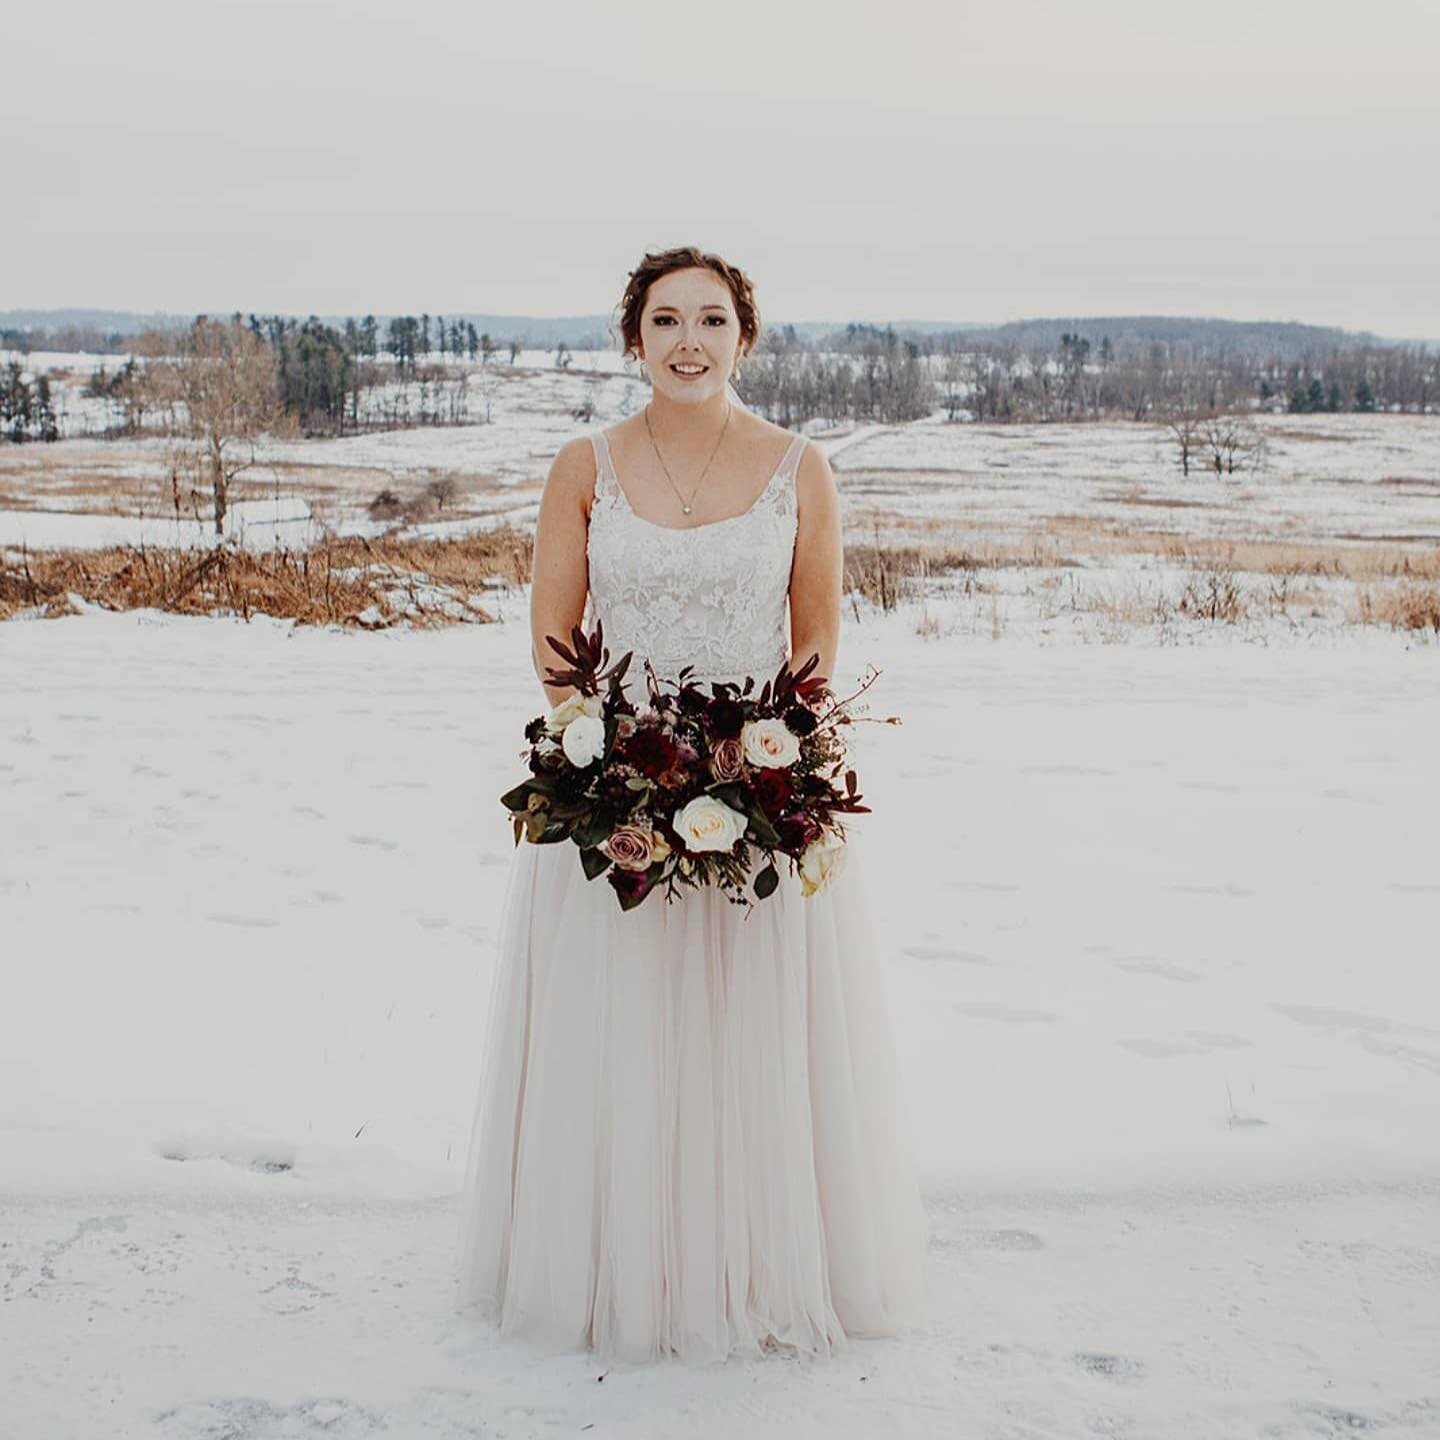 The timing of this snowfall was juust right for this December wedding.

Also, I think it&rsquo;s a good indication that I&rsquo;m in the right profession that I *can&rsquo;t wait* for wedding season to start up again.

P.C. @melissamclphotography

&b